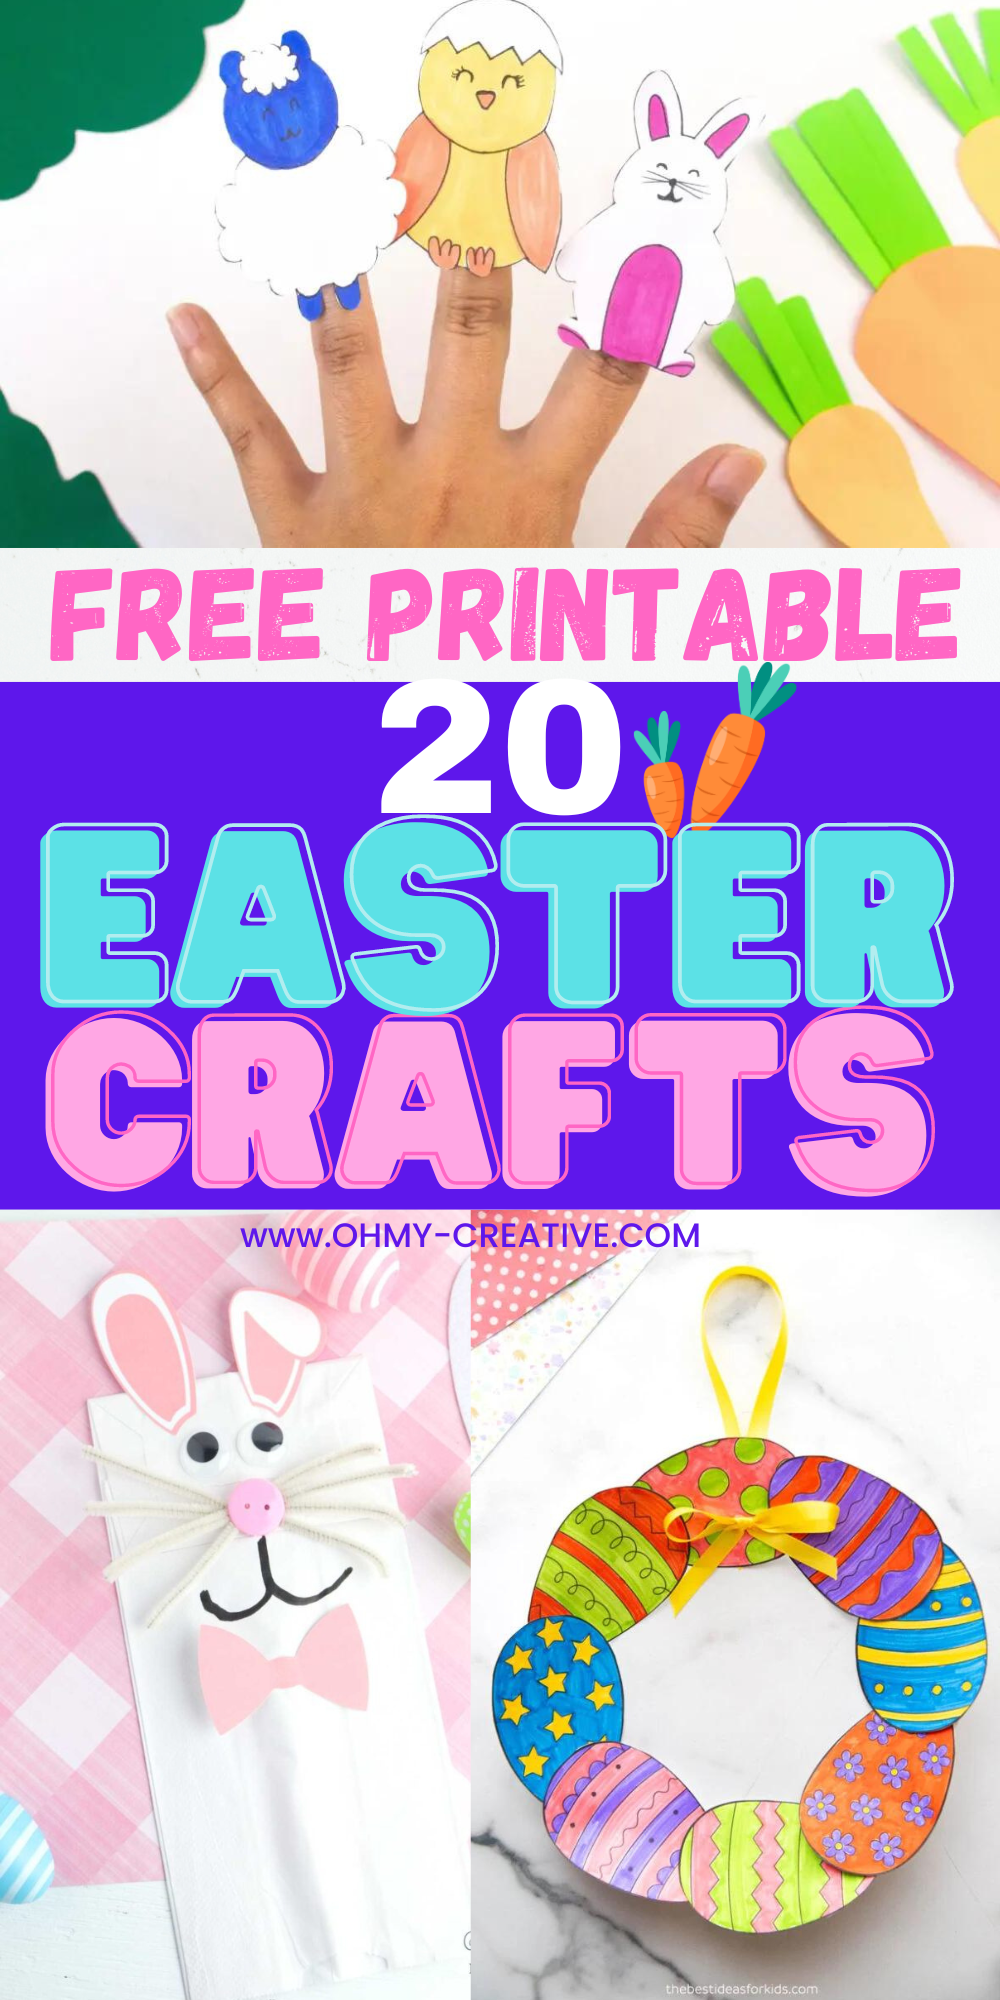 A pin collage for 20 easter crafts for kids that include free printables.